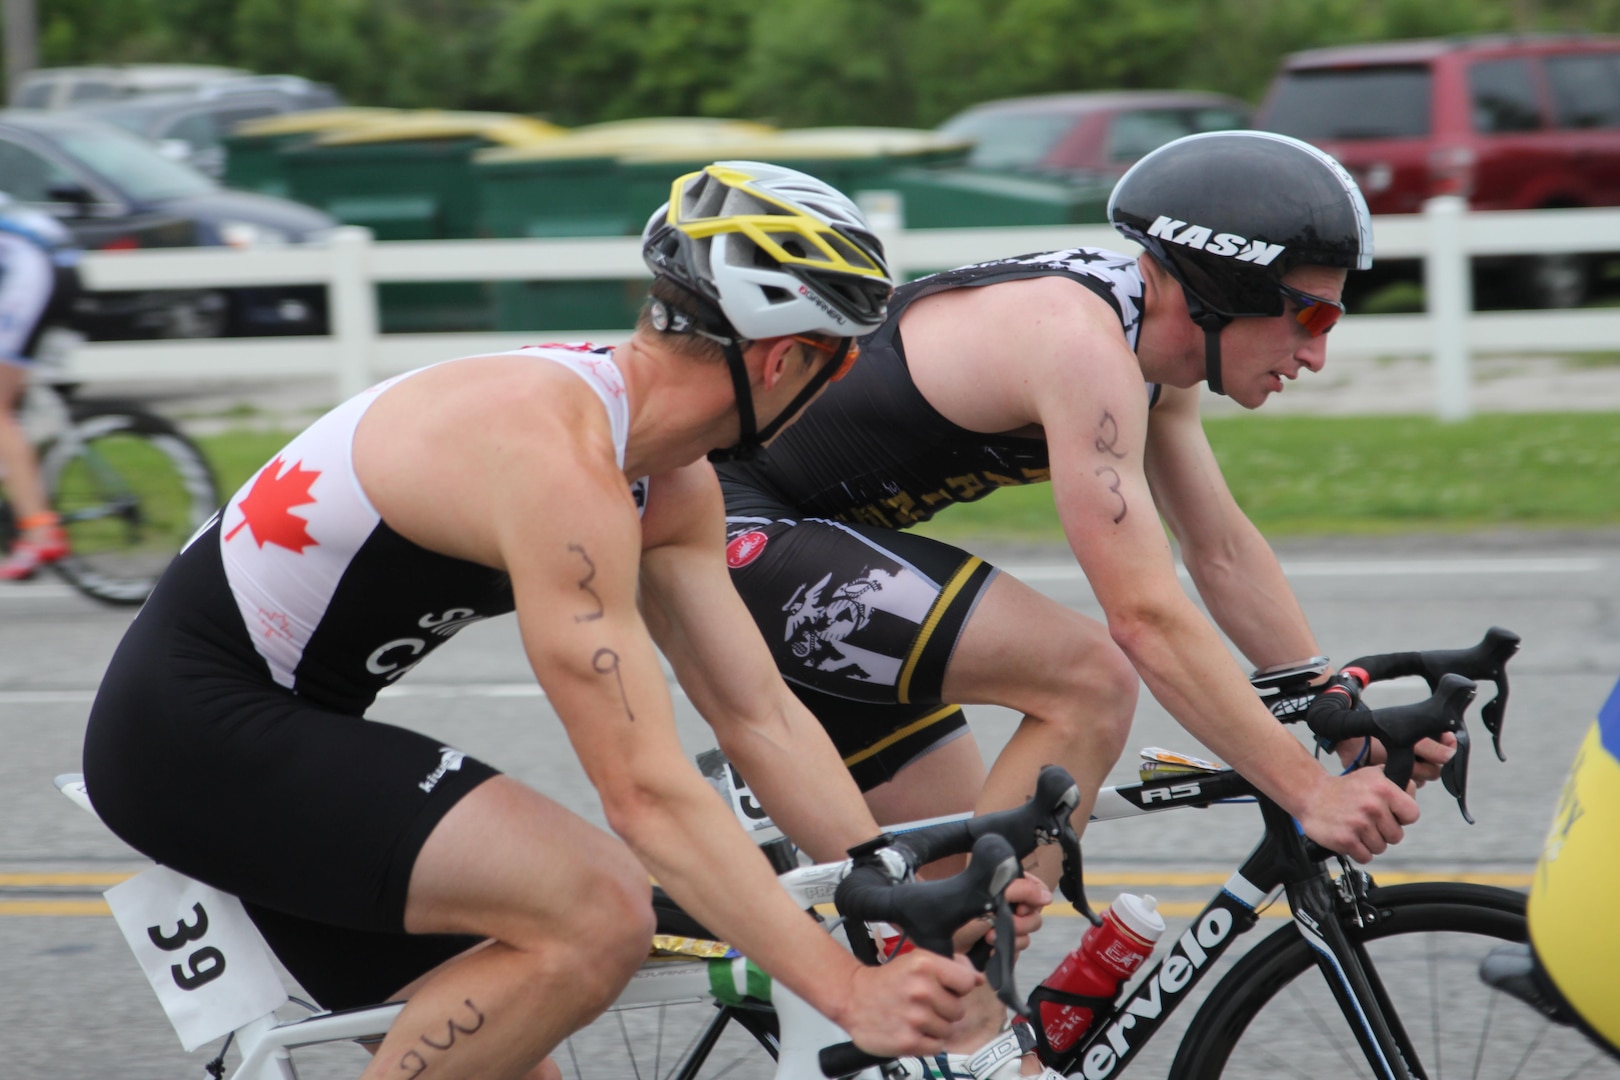 Canadian Armed Forces triathlete Dave Simpkin of Ottawa, Ontario rides along with Marine Corps Capt. Sean Sullivan of MCB Quantico, Va. During the 2015 Armed Forces Triathlon Championship at Wolf Lake in Hammond, Ind. held in conjunction with Leon's Triathlon on June 7, 2015. USA and Canada competed together in preparation of the CISM Military World Games held in Mungyeong, South Korea 1-12 October 2015.